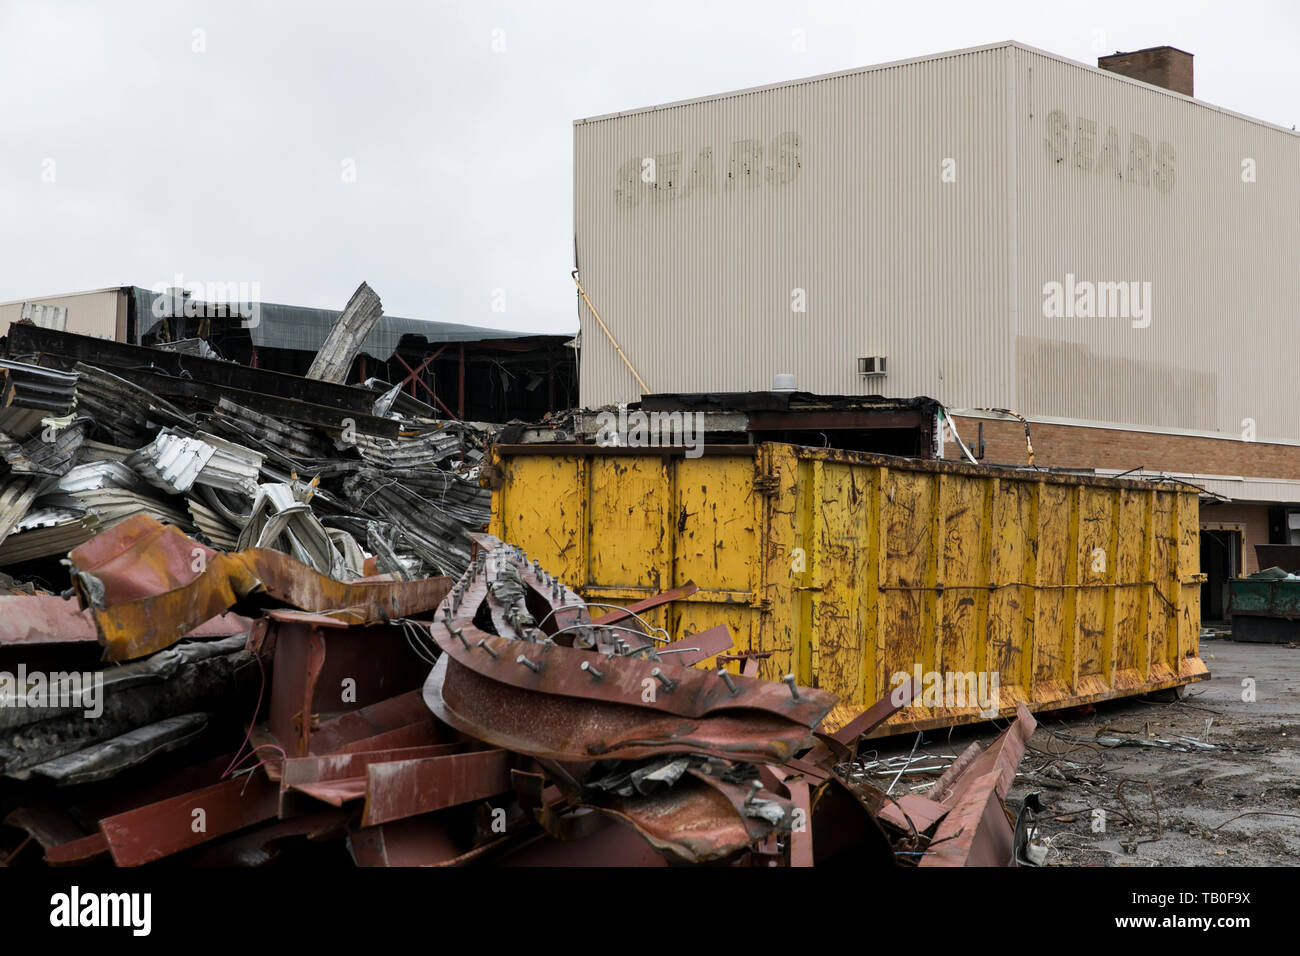 Debris surrounds the site of a closed Sears retail store during its demolition in Ottawa, Ontario, Canada, on April 20, 2019. Stock Photo